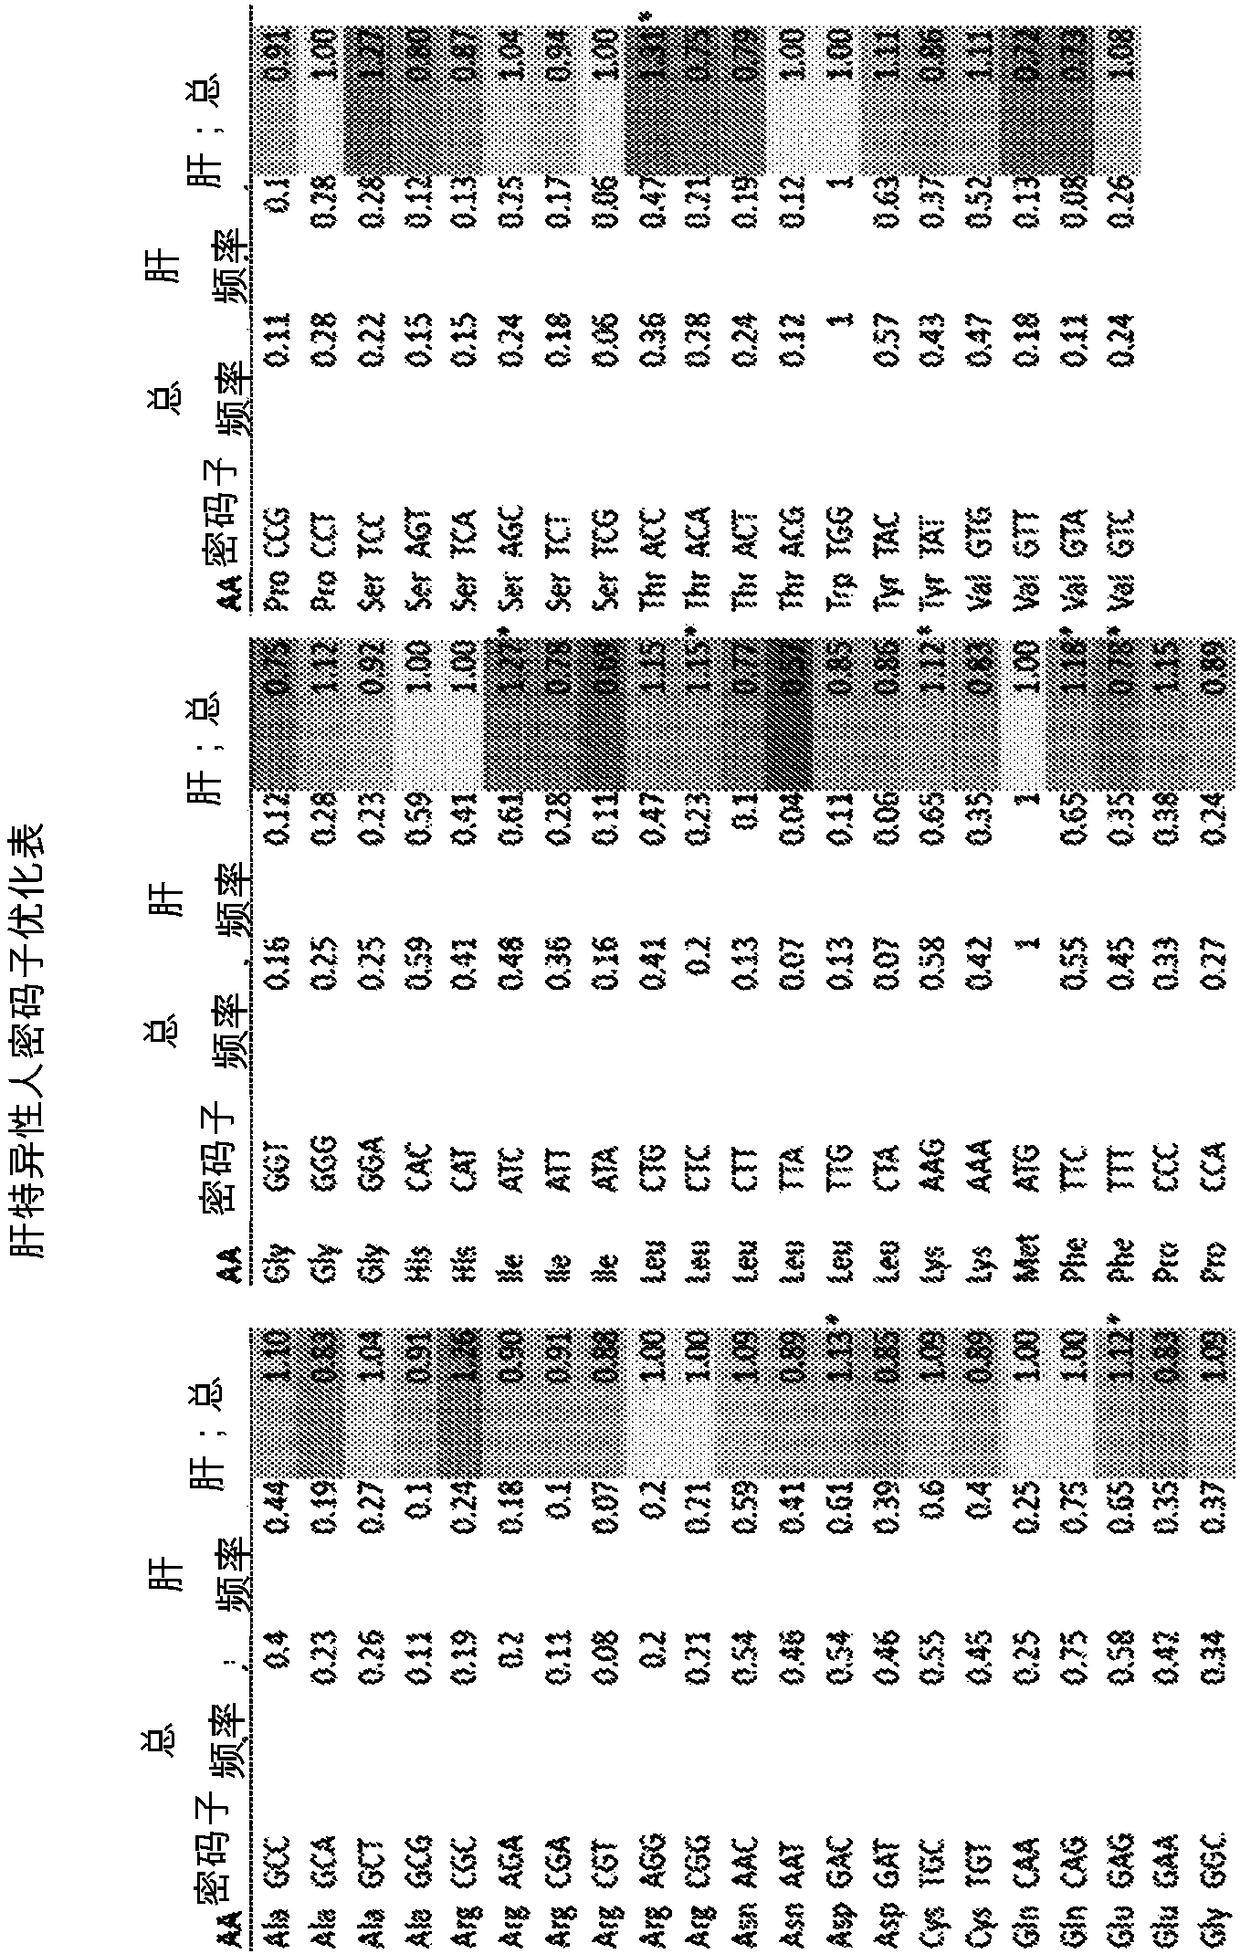 Recombinant promoters and vectors for protein expression in liver and use thereof